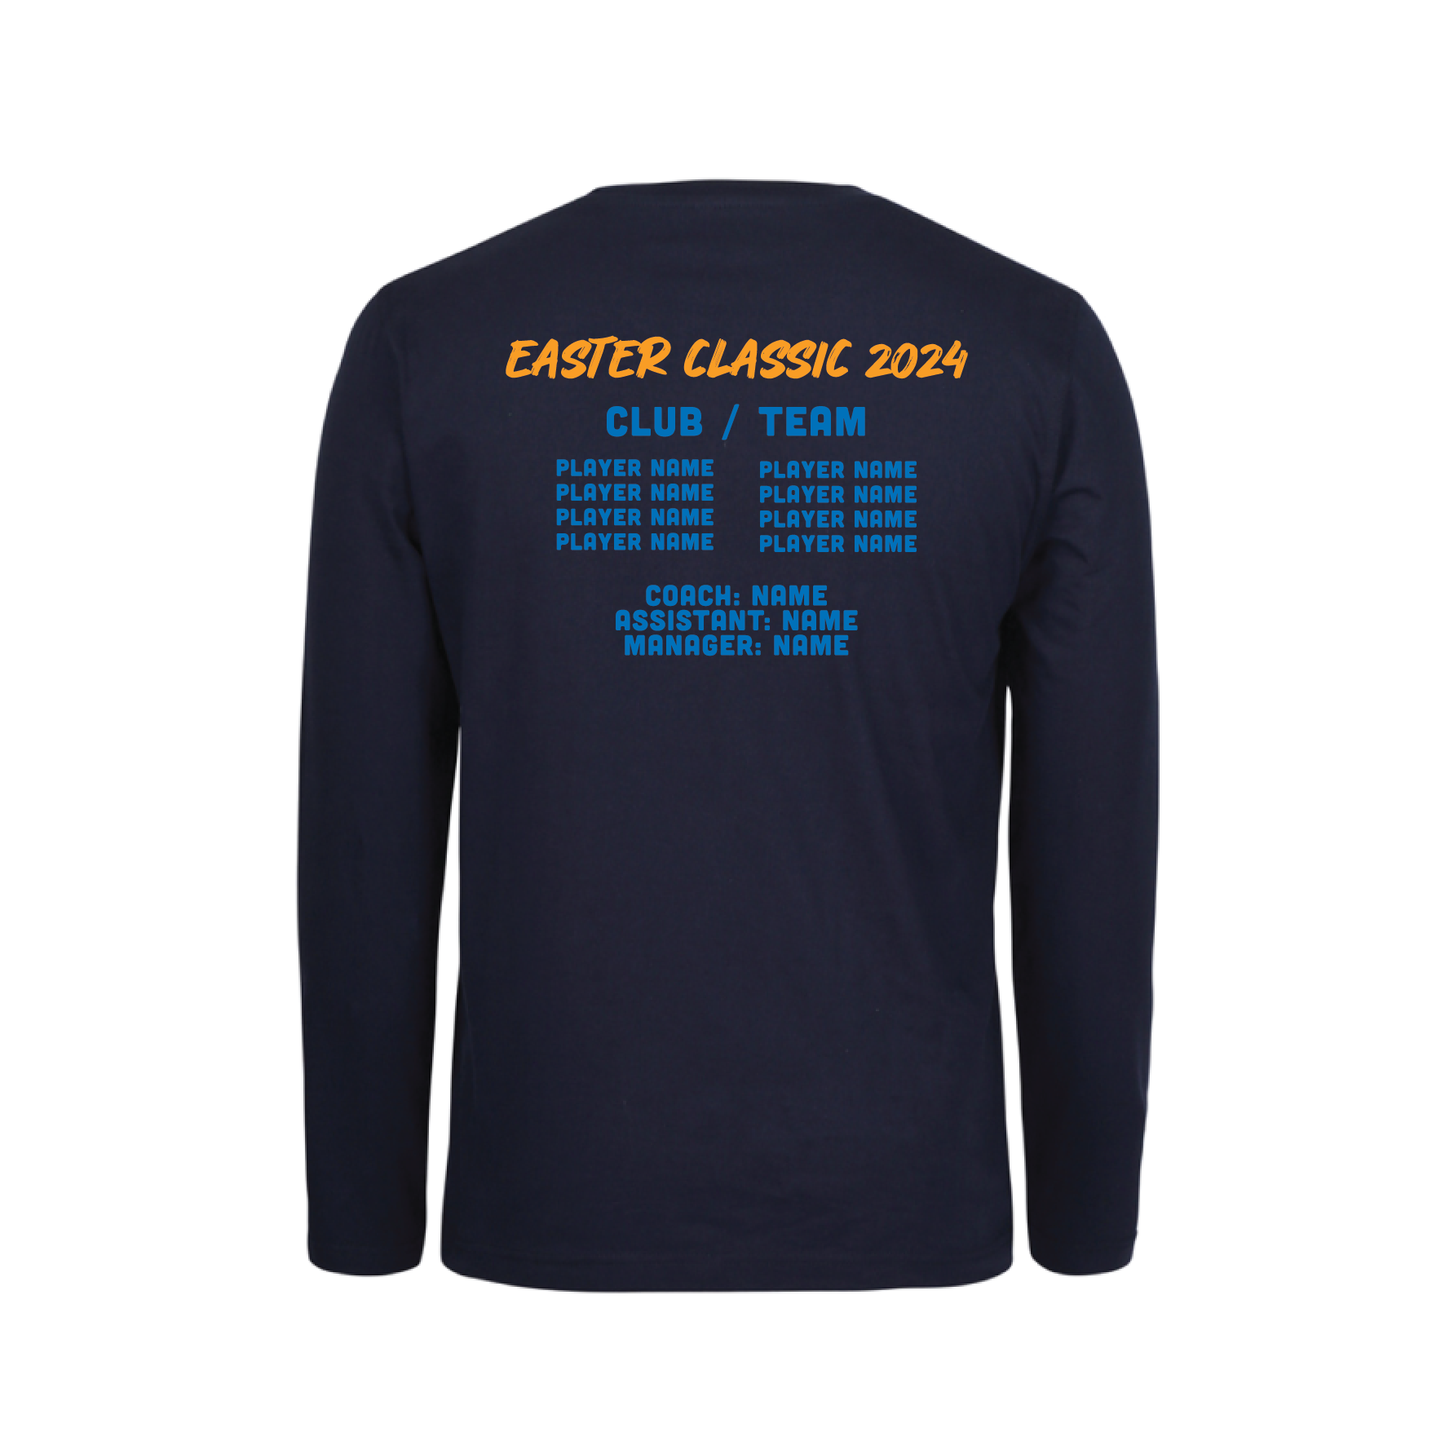 EASTER CLASSIC T-SHIRT NAVY LONG SLEEVE TEAM AND INDIVIDUAL PLAYER NAMES ON BACK (MIN QTY 8+)